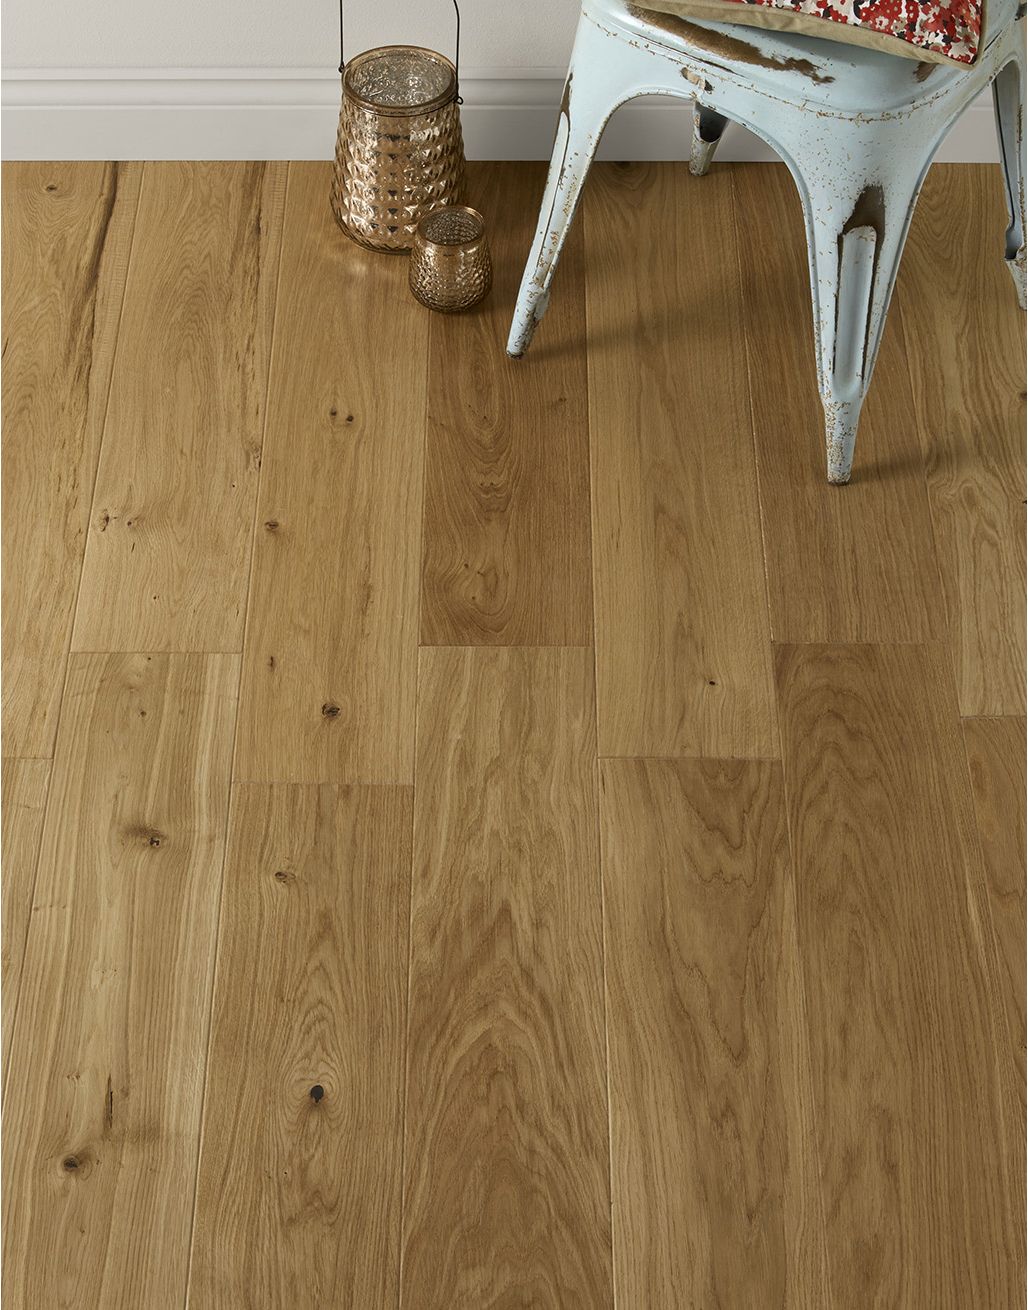 Carpenters Choice Natural Brushed & Oiled 14mm x 180mm Engineered Wood Flooring 2